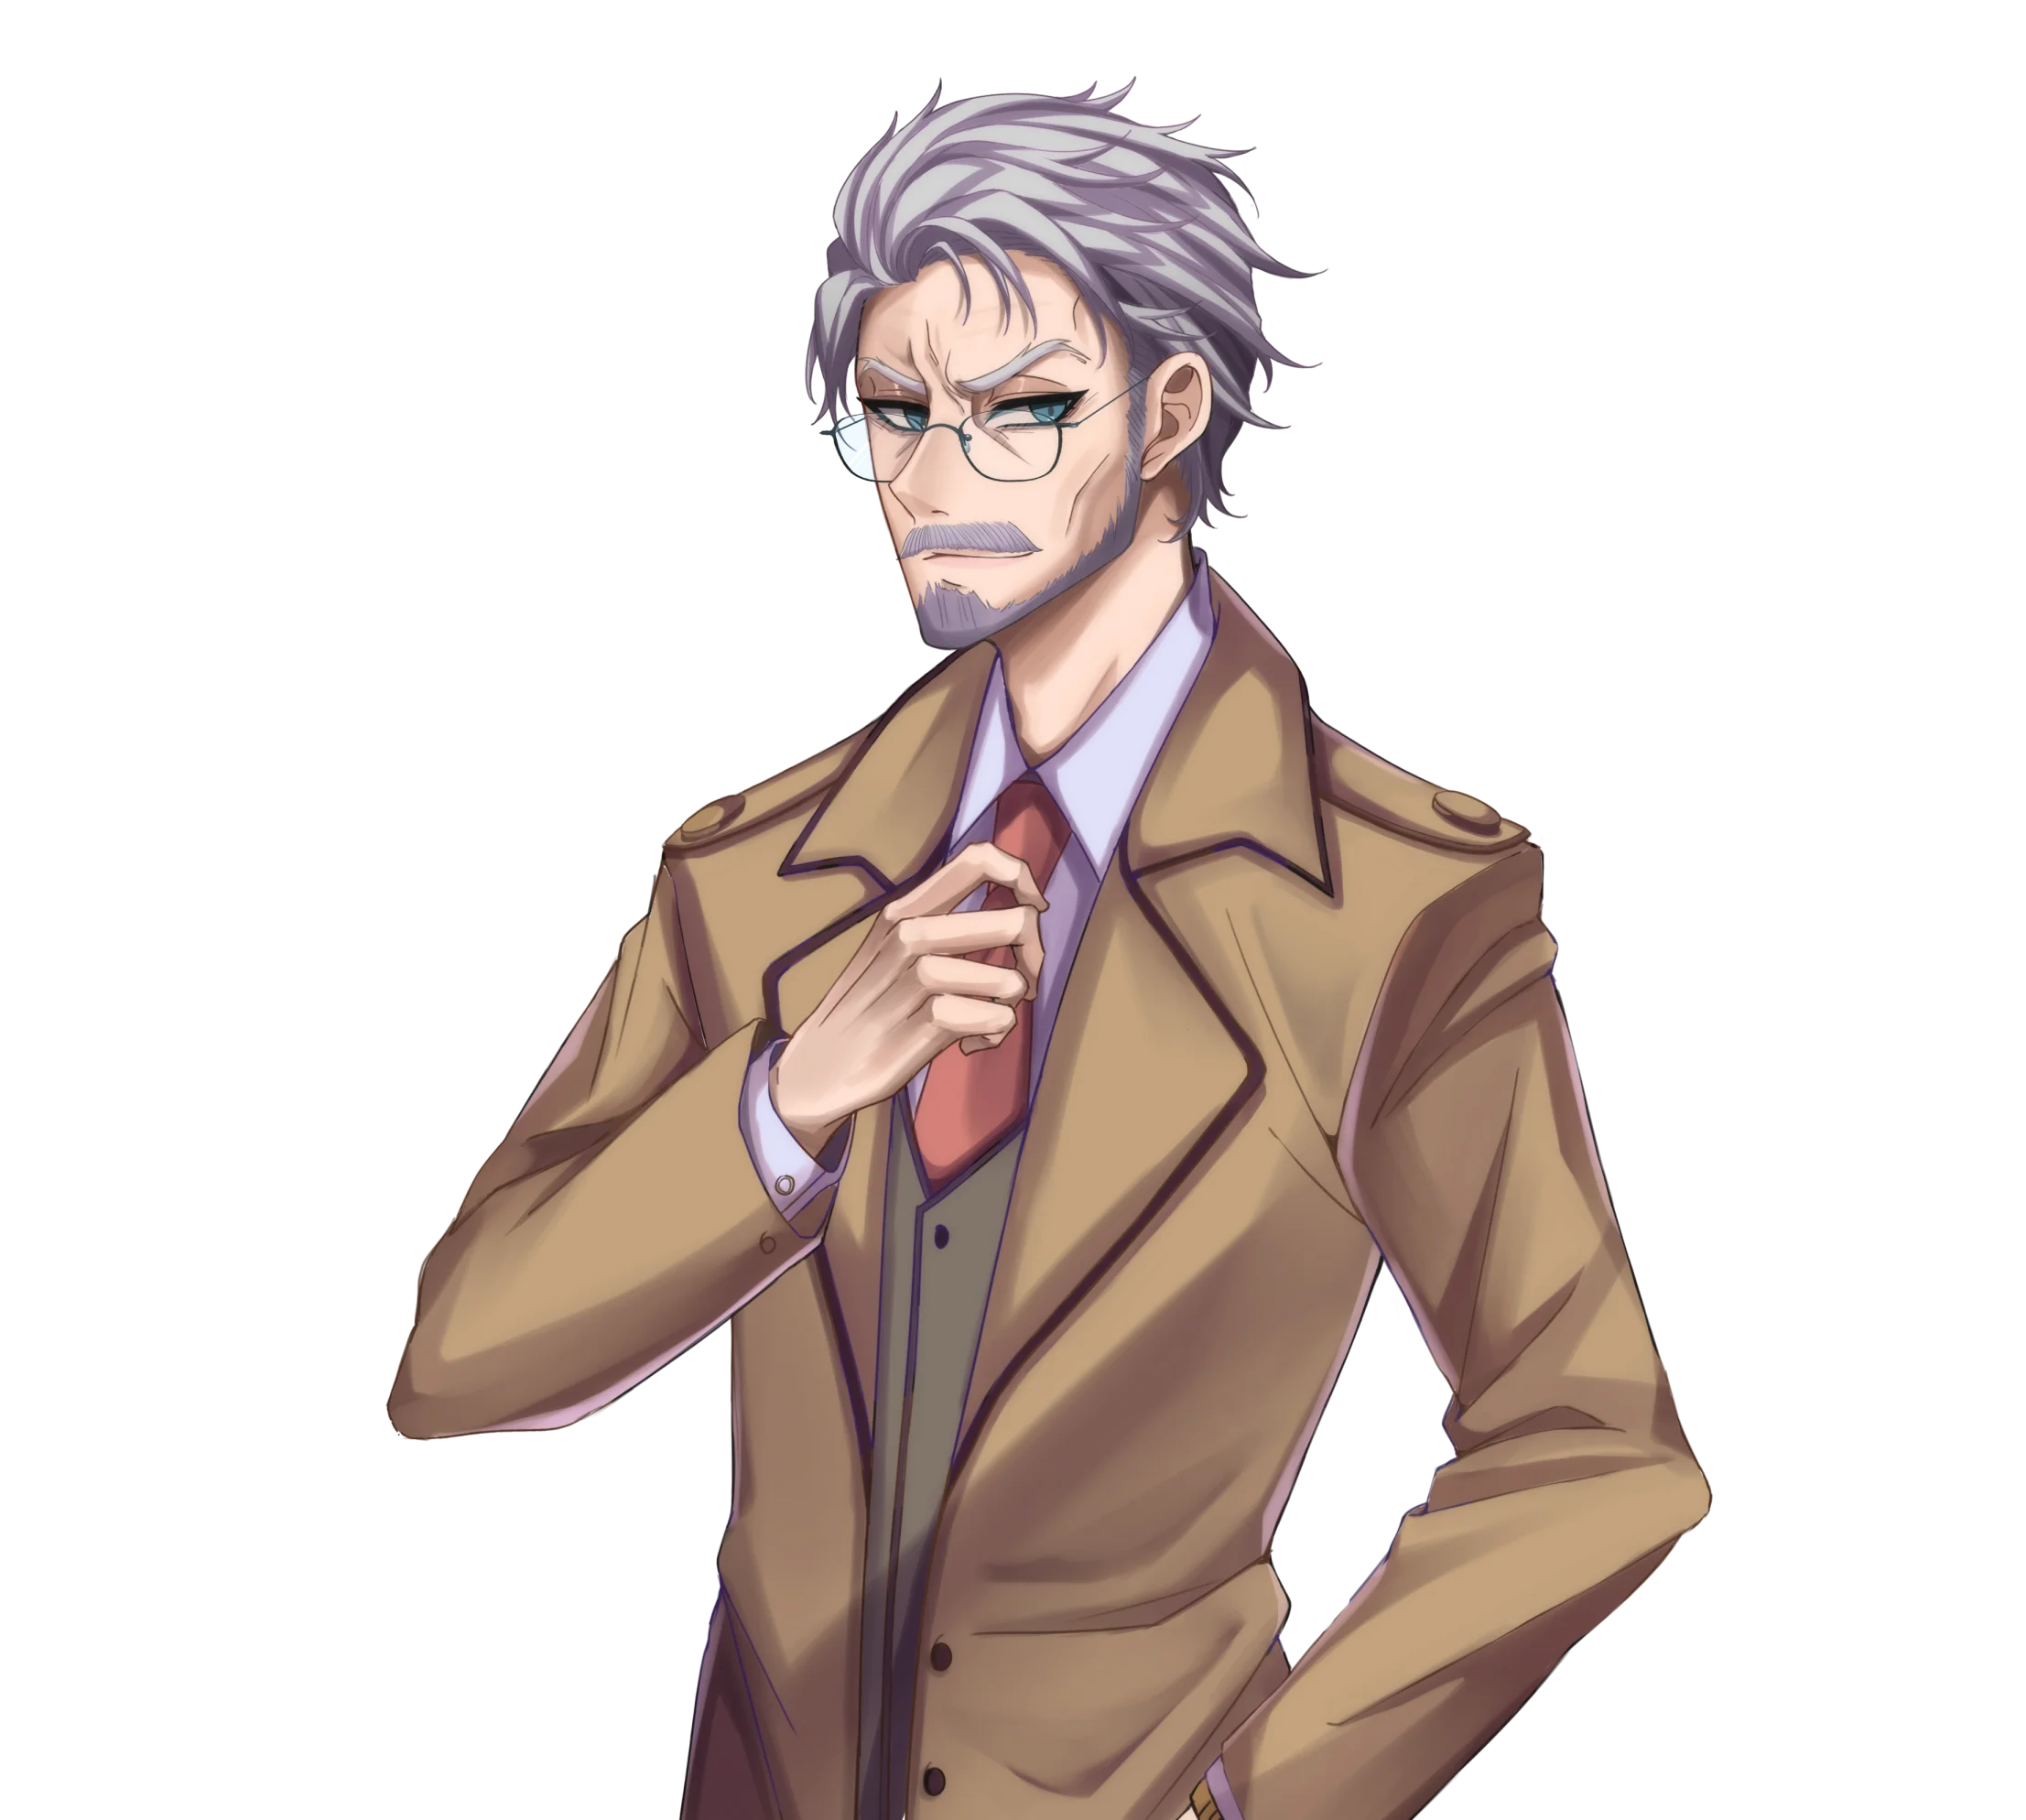 Marco: Works in an antique shop and often ponders the meaning of existence. He enjoys reading books on many subjects such as philosophy. He is a very good friend of Horatio’s father and Maria.